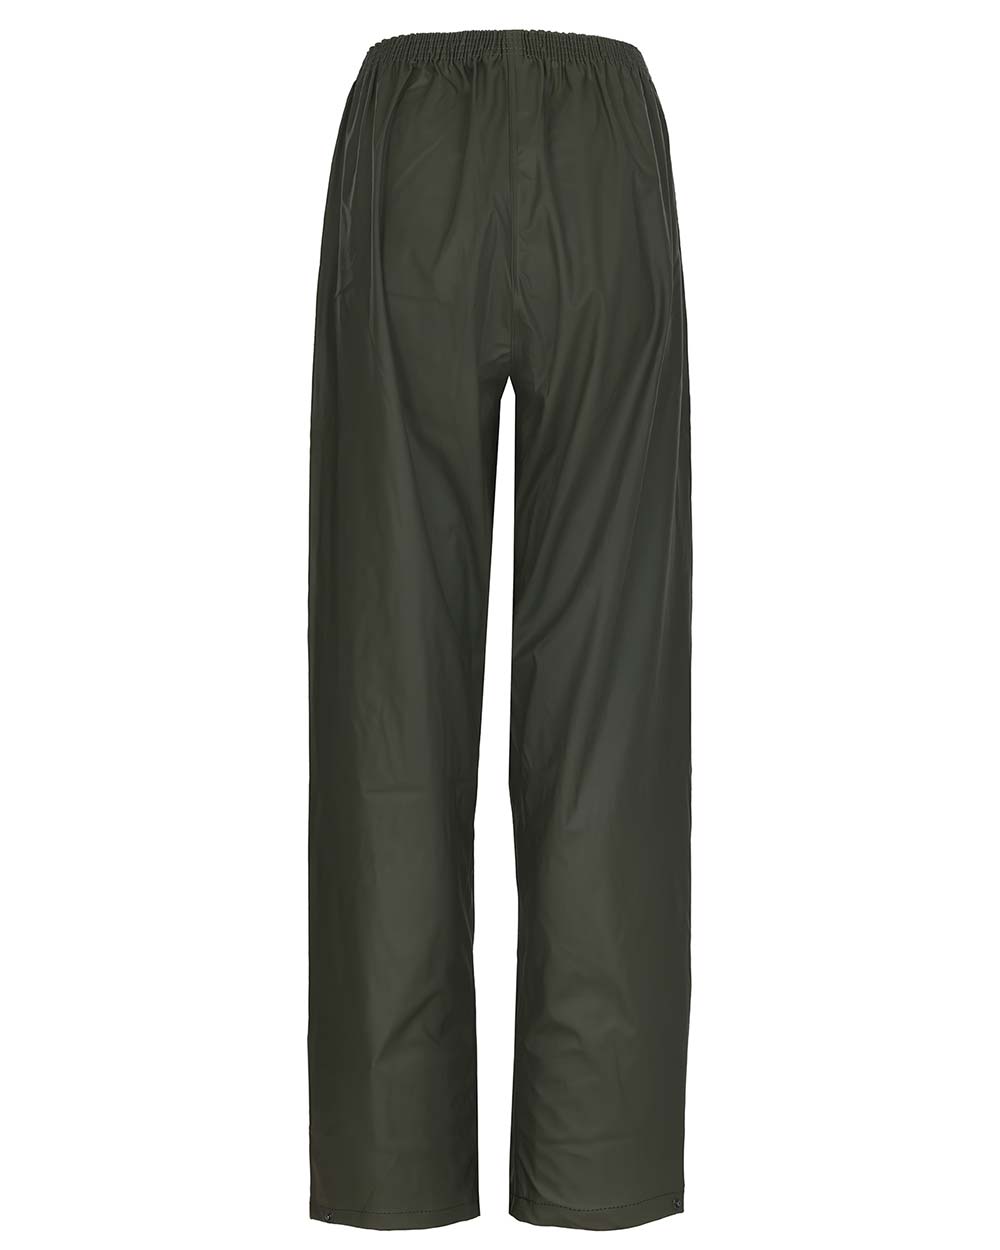 Back view Fort Airflex Waterproof Breathable Trousers in Olive 